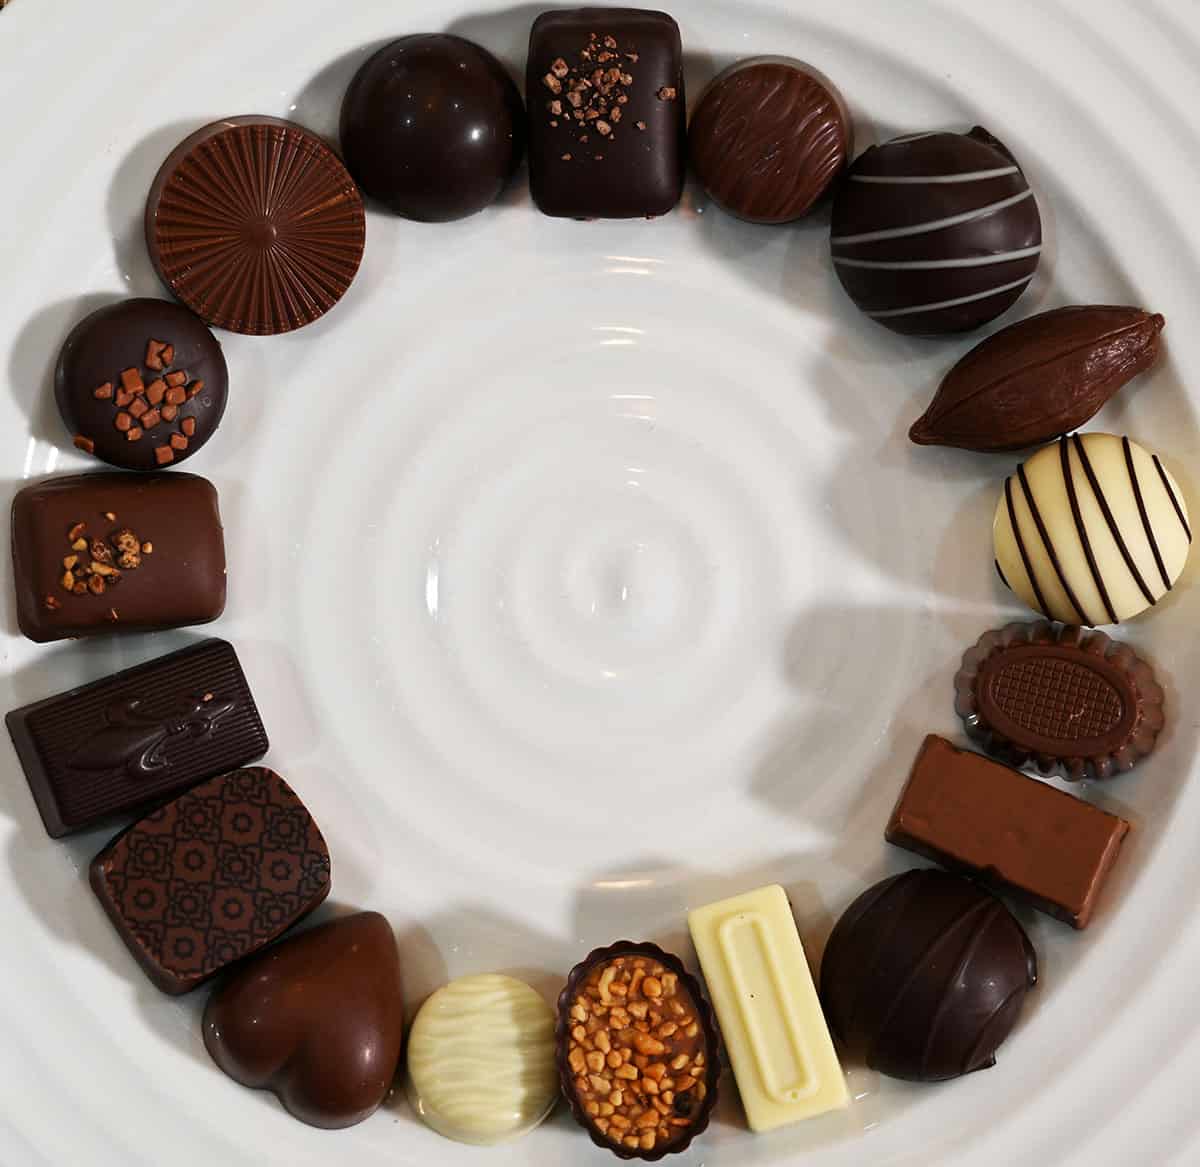 Image of all the different kinds of chocolate on a white plate served in a circle.